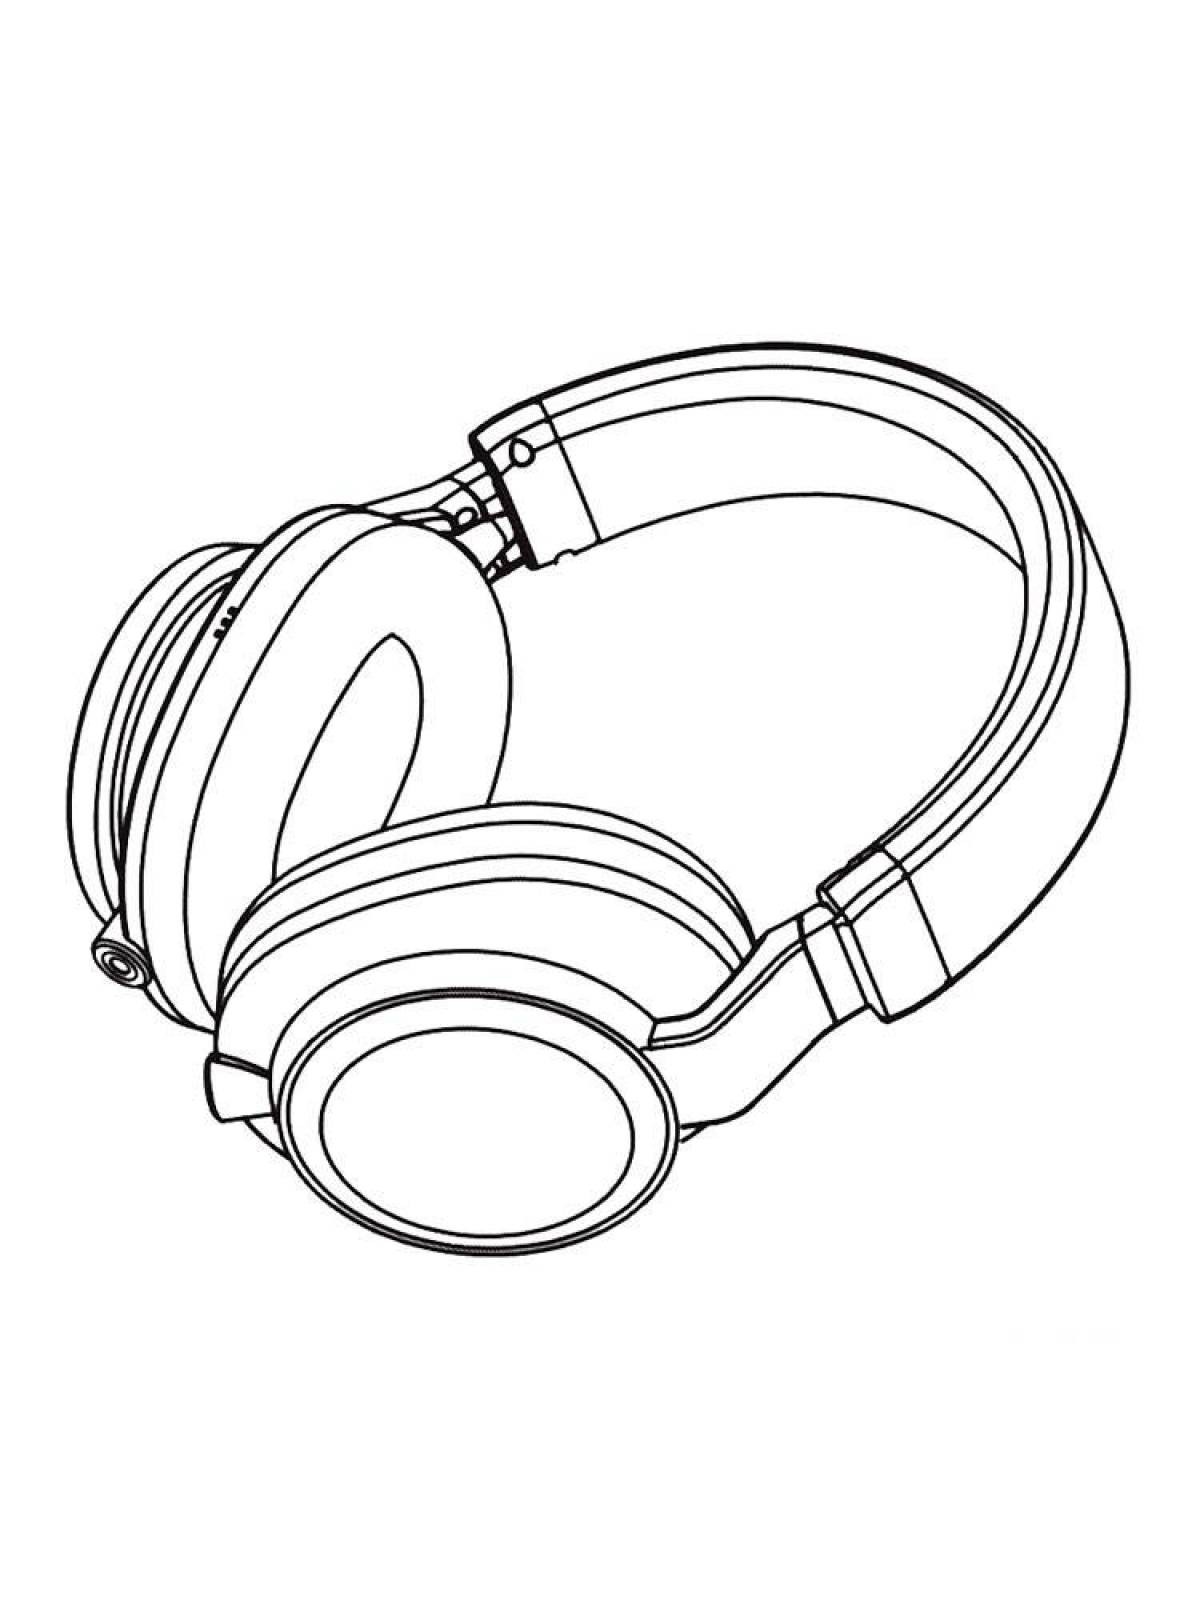 Colourful headphone coloring page